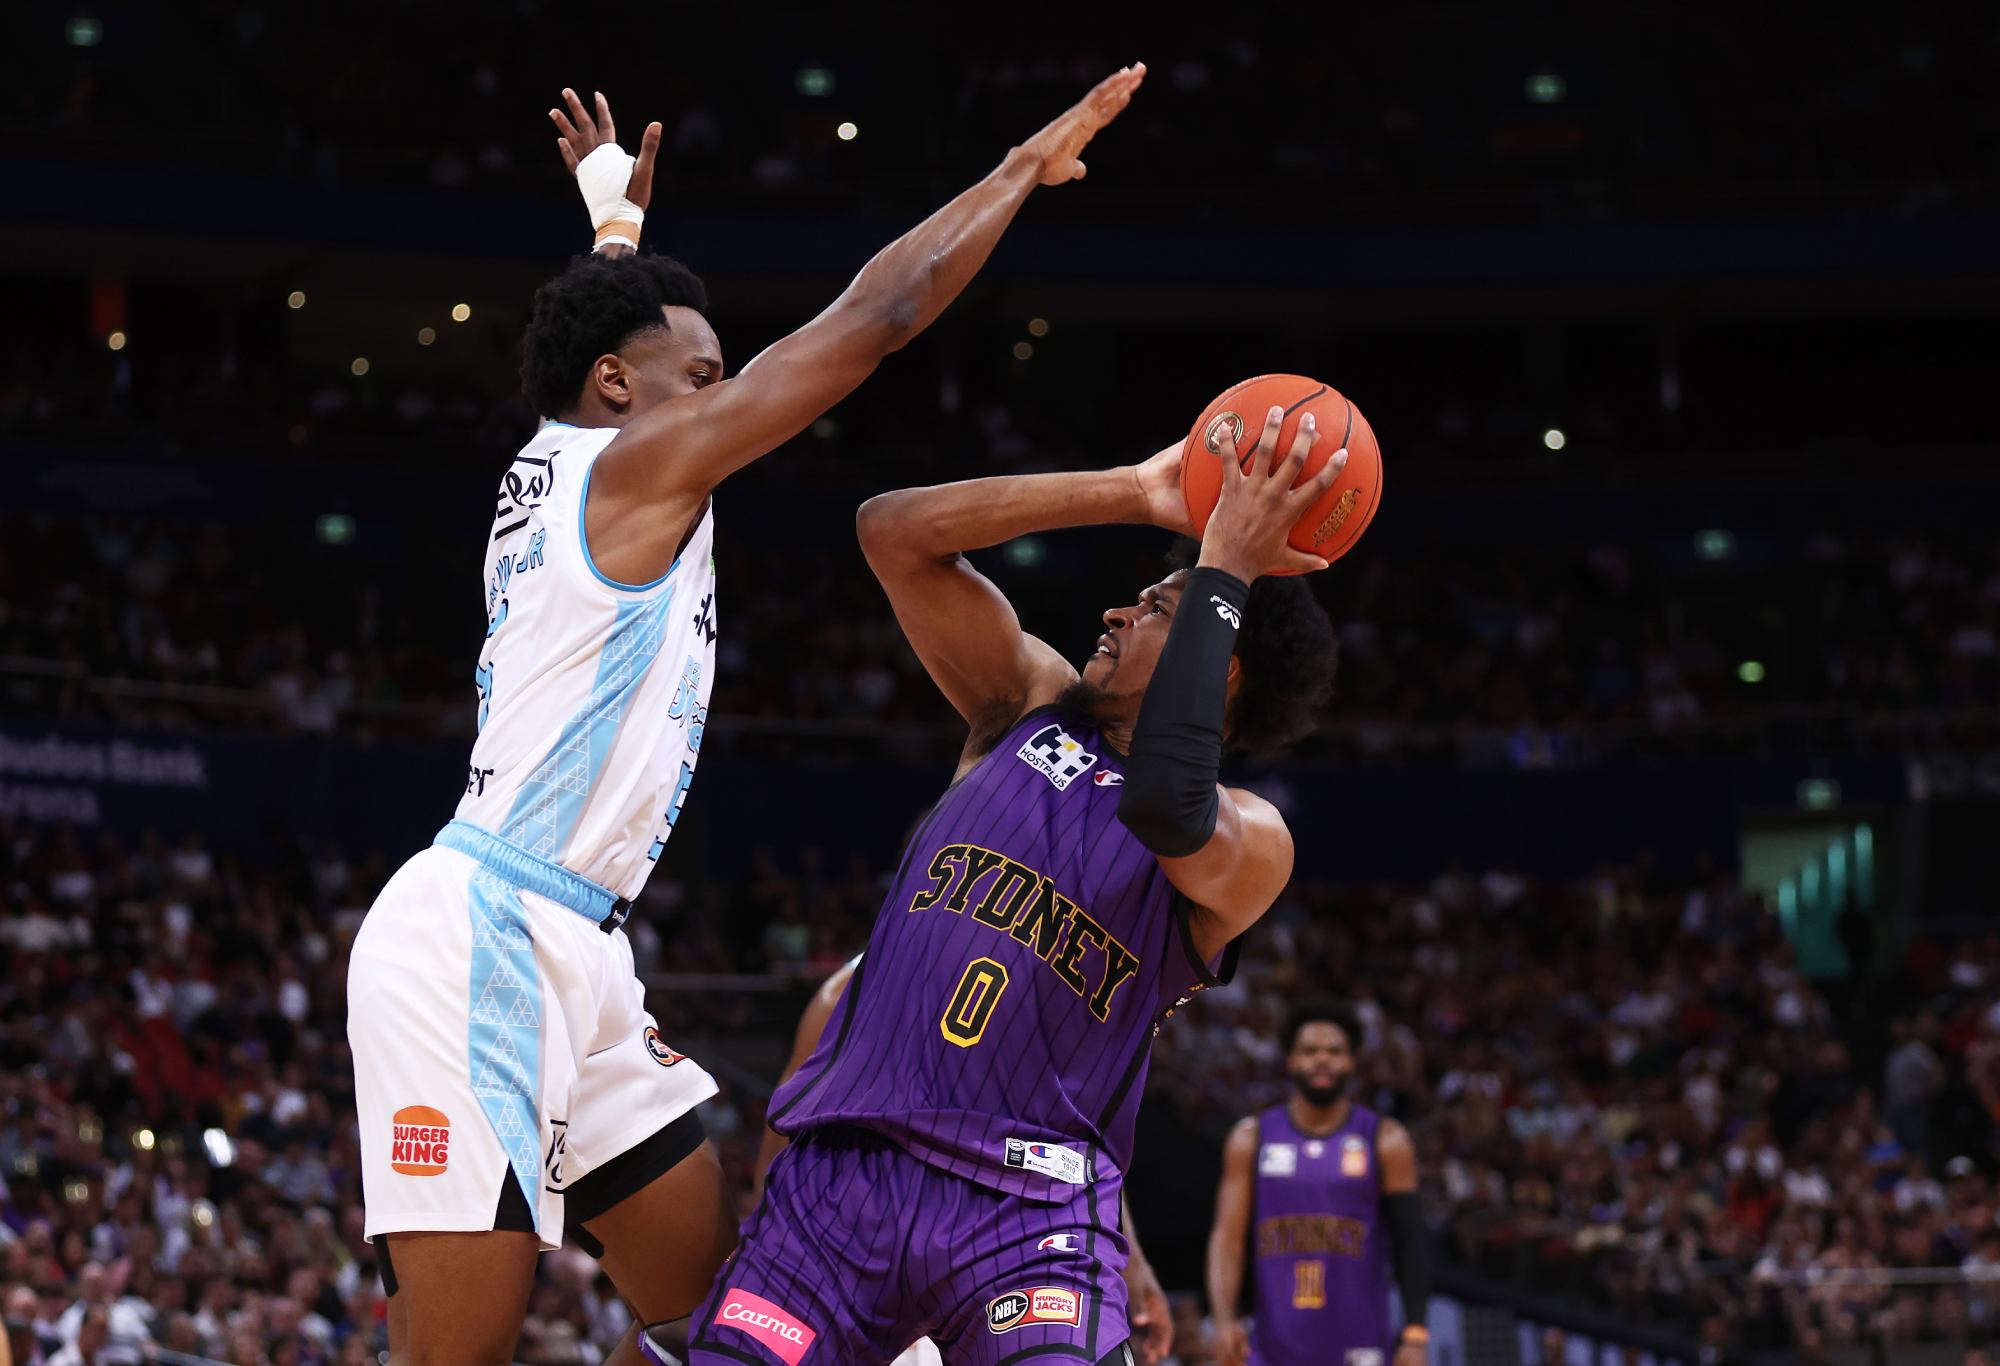 SYDNEY, AUSTRALIA - MARCH 3: Justin Simon of the Kings is tackled by Barry Brown Jr. of the Breakers during game one of the NBL Grand Final Series between Sydney Kings and New Zealand Breakers at Qudos Bank Arena on March 3, 2023 in Sydney challenged , Australia. (Photo by Matt King/Getty Images)